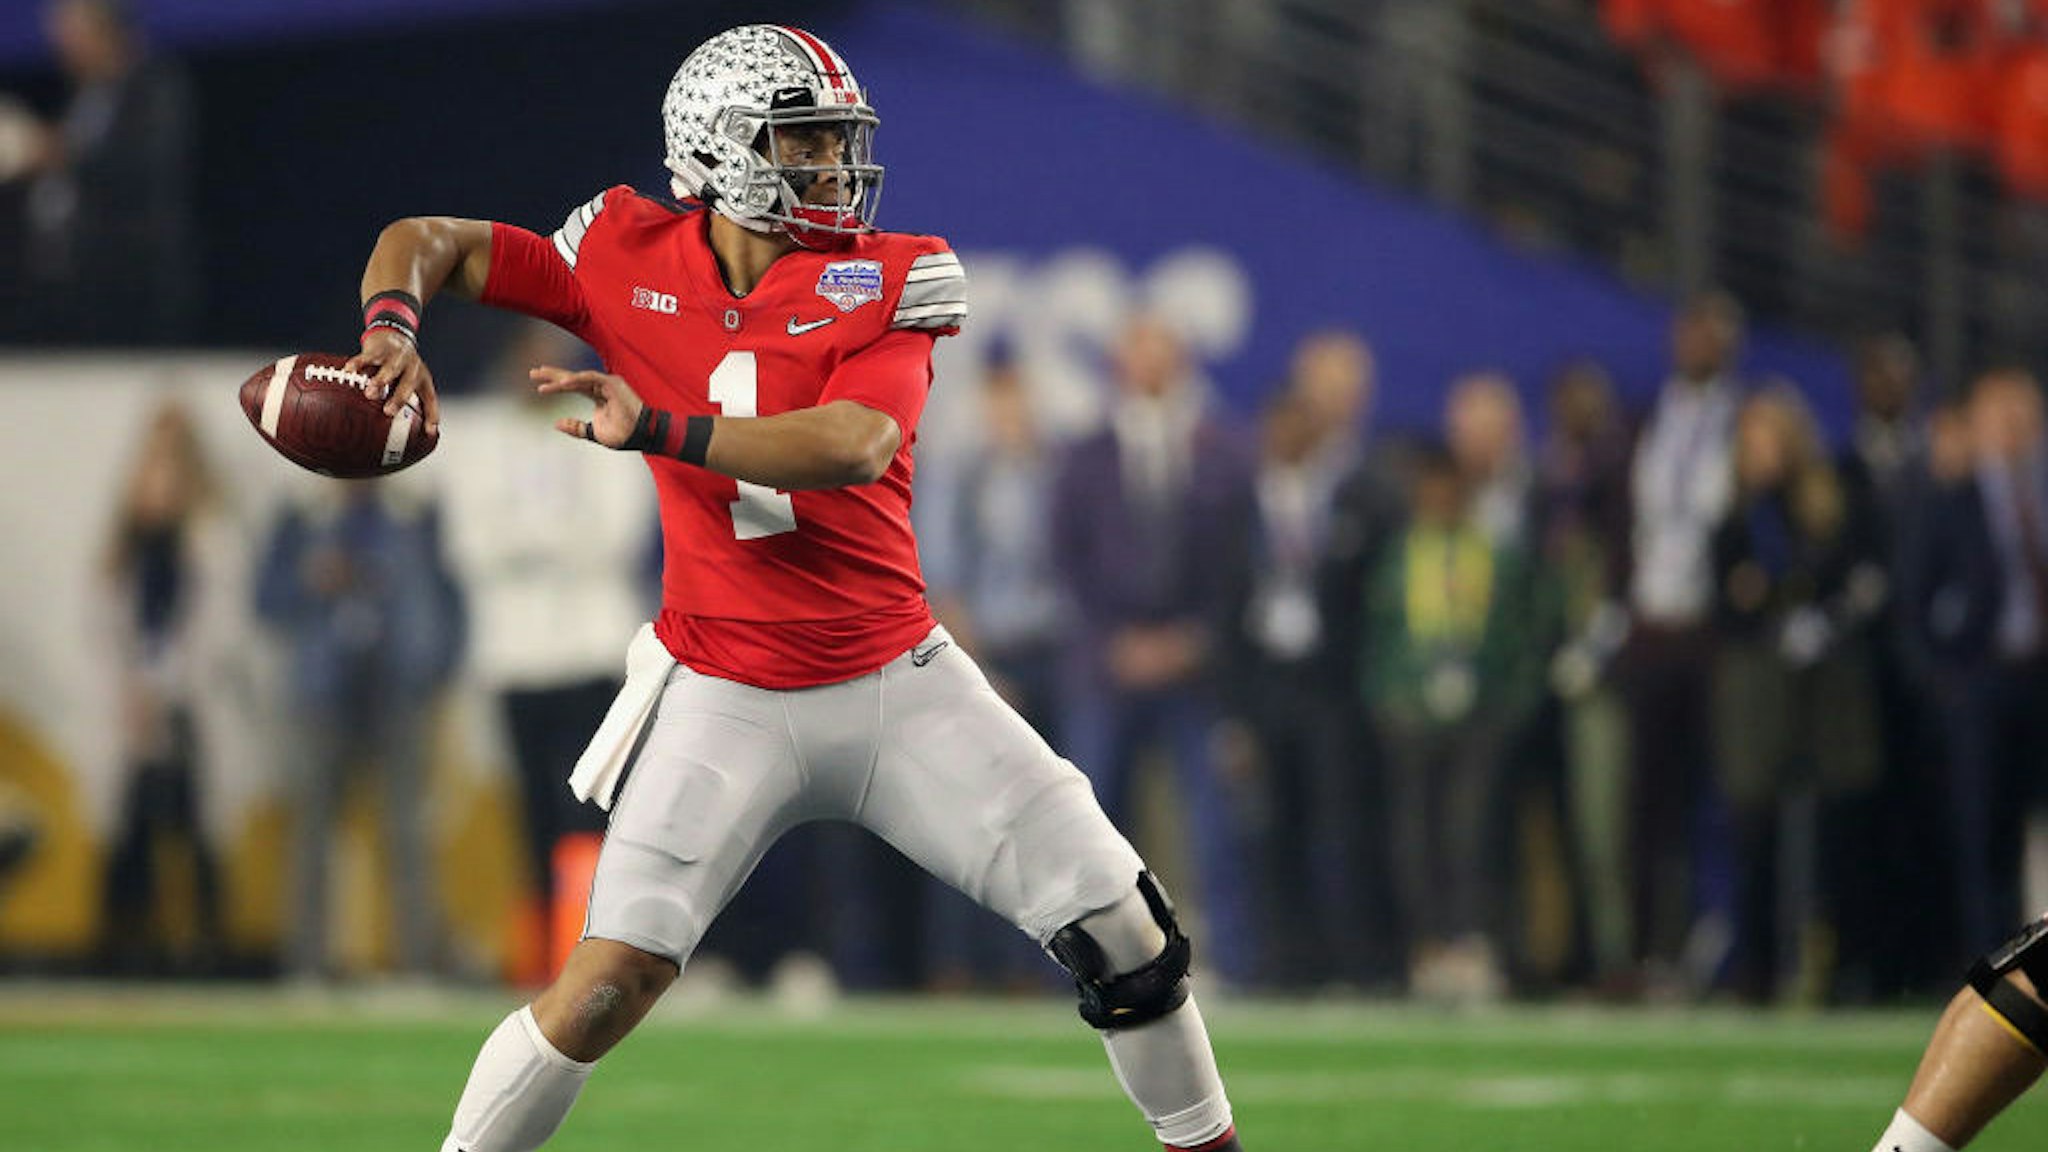 GLENDALE, ARIZONA - DECEMBER 28: Quarterback Justin Fields #1 of the Ohio State Buckeyes throws a pass during the PlayStation Fiesta Bowl against the Clemson Tigers at State Farm Stadium on December 28, 2019 in Glendale, Arizona. The Tigers defeated the Buckeyes 29-23. (Photo by Christian Petersen/Getty Images)